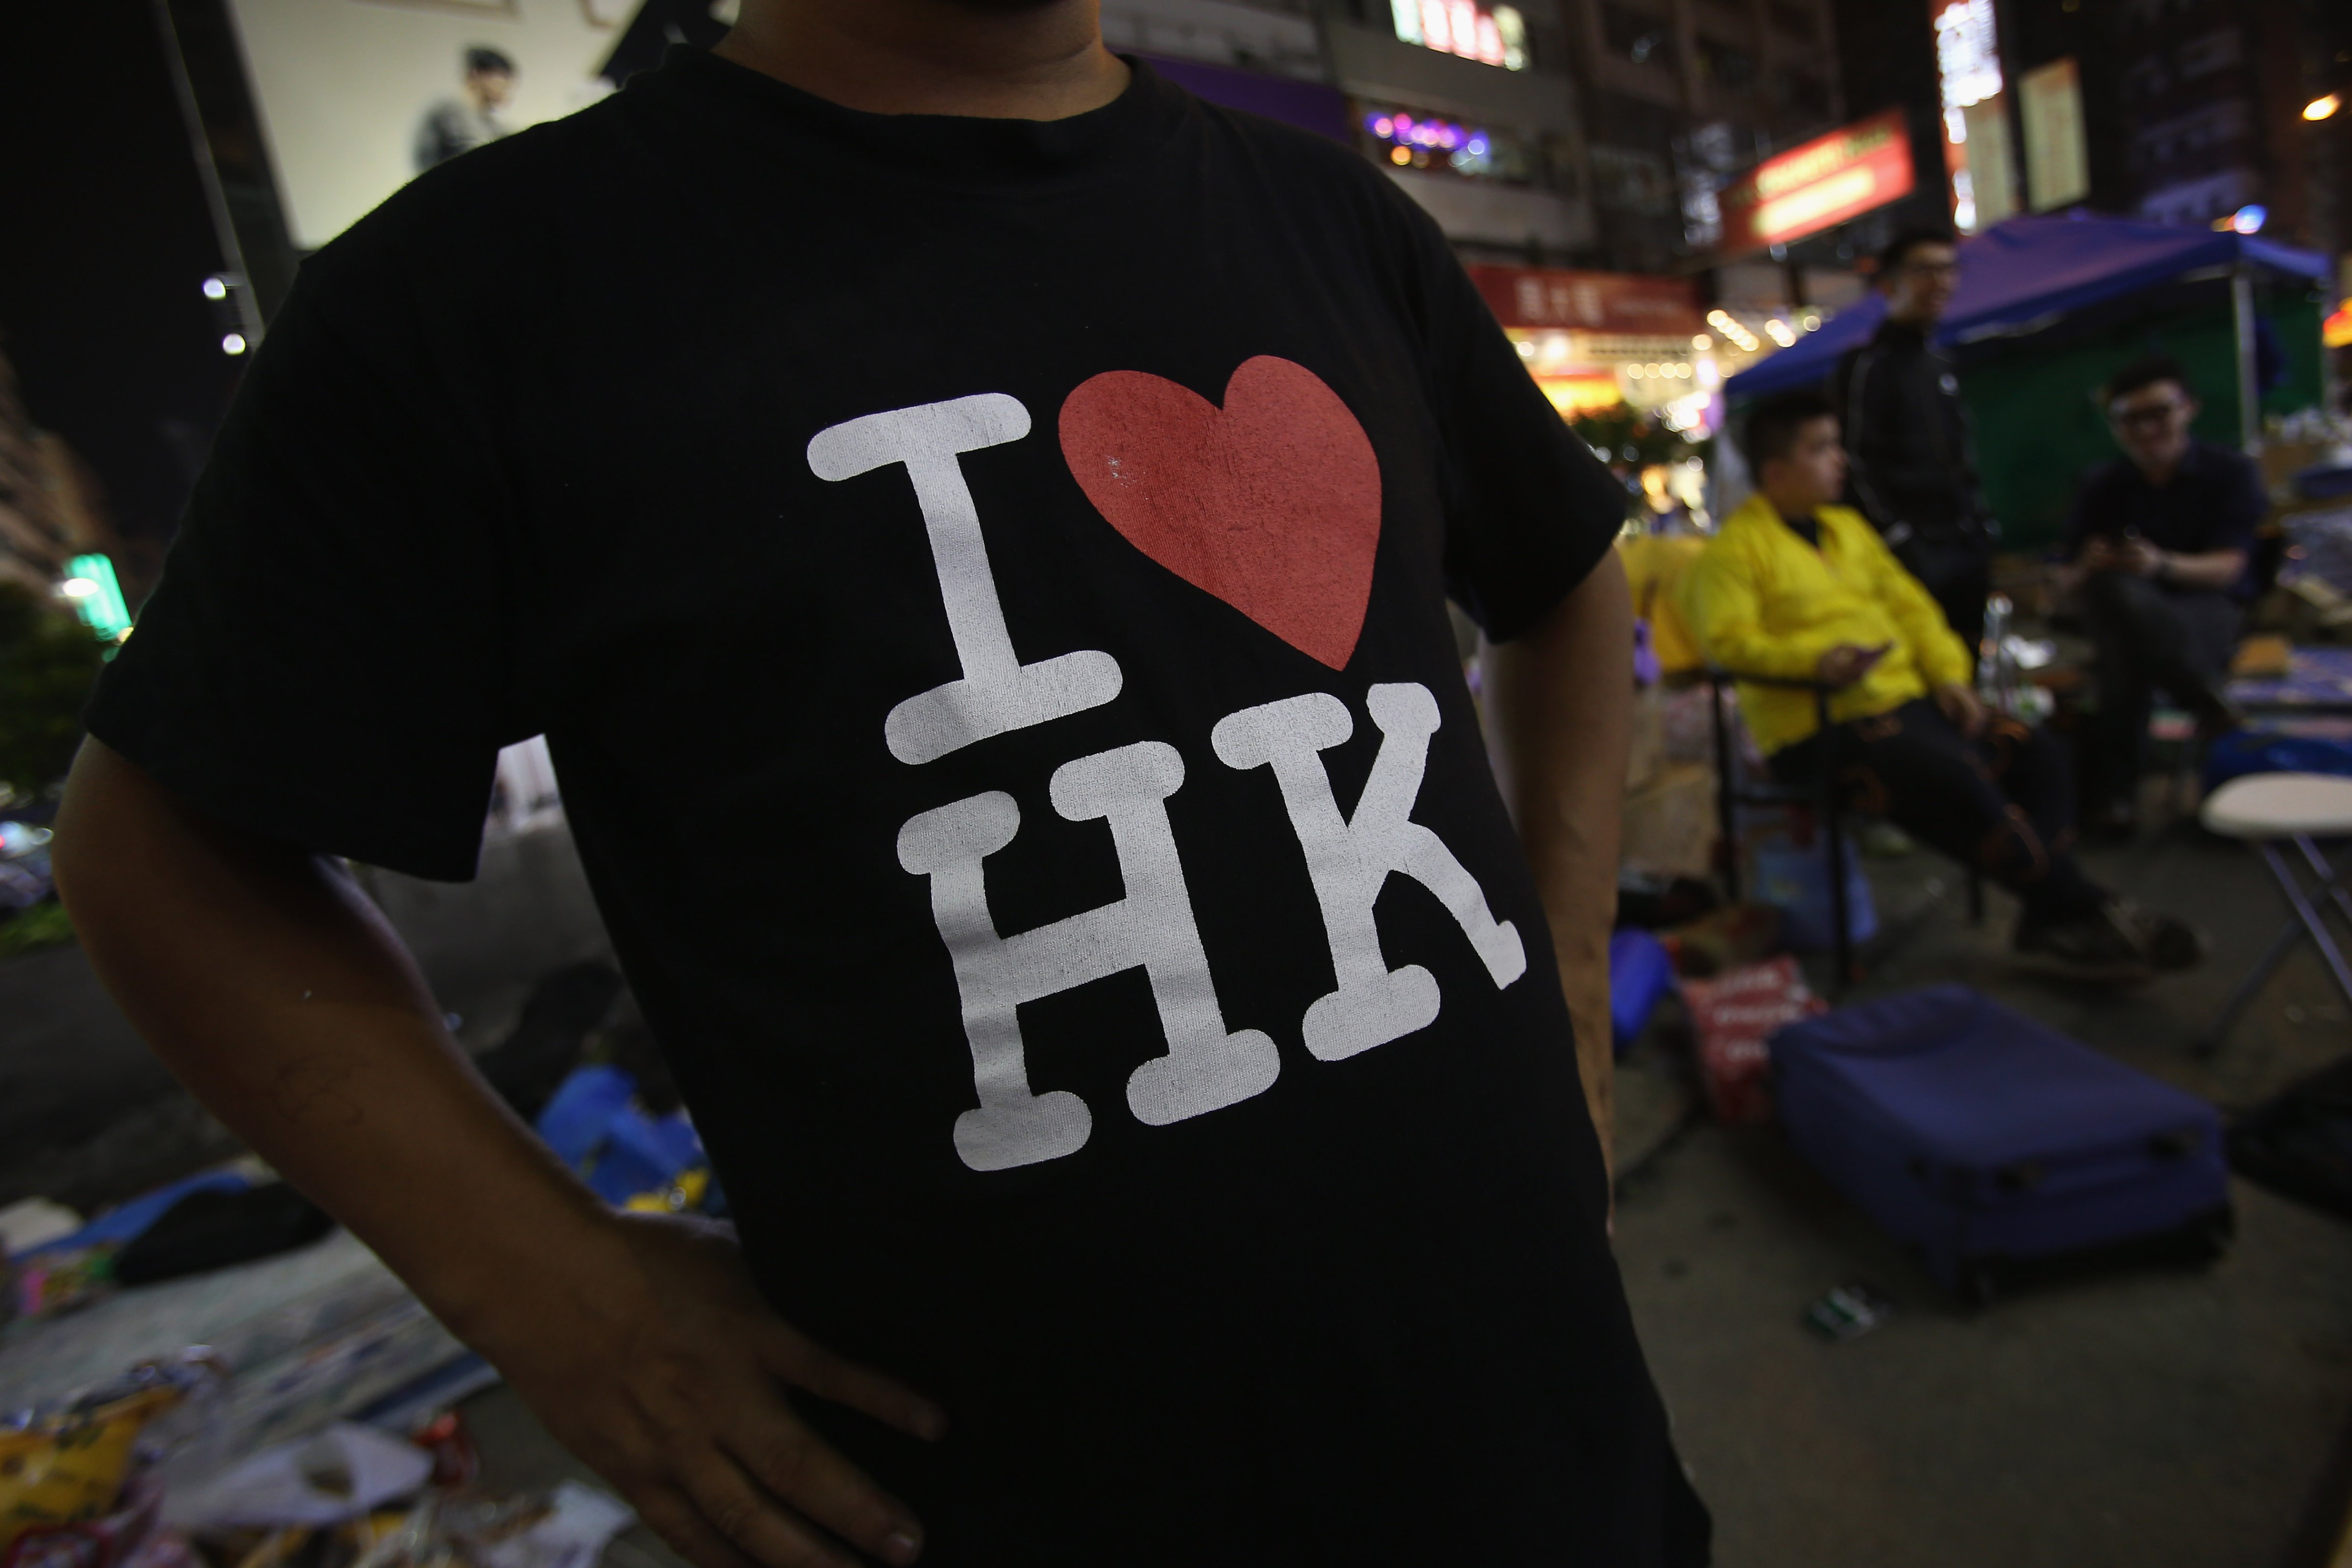 A pro-democracy protester displays his T-shirt on a street in Mongkok district on October 22, 2014 in Hong Kong. (Kong Ng—Getty Images)